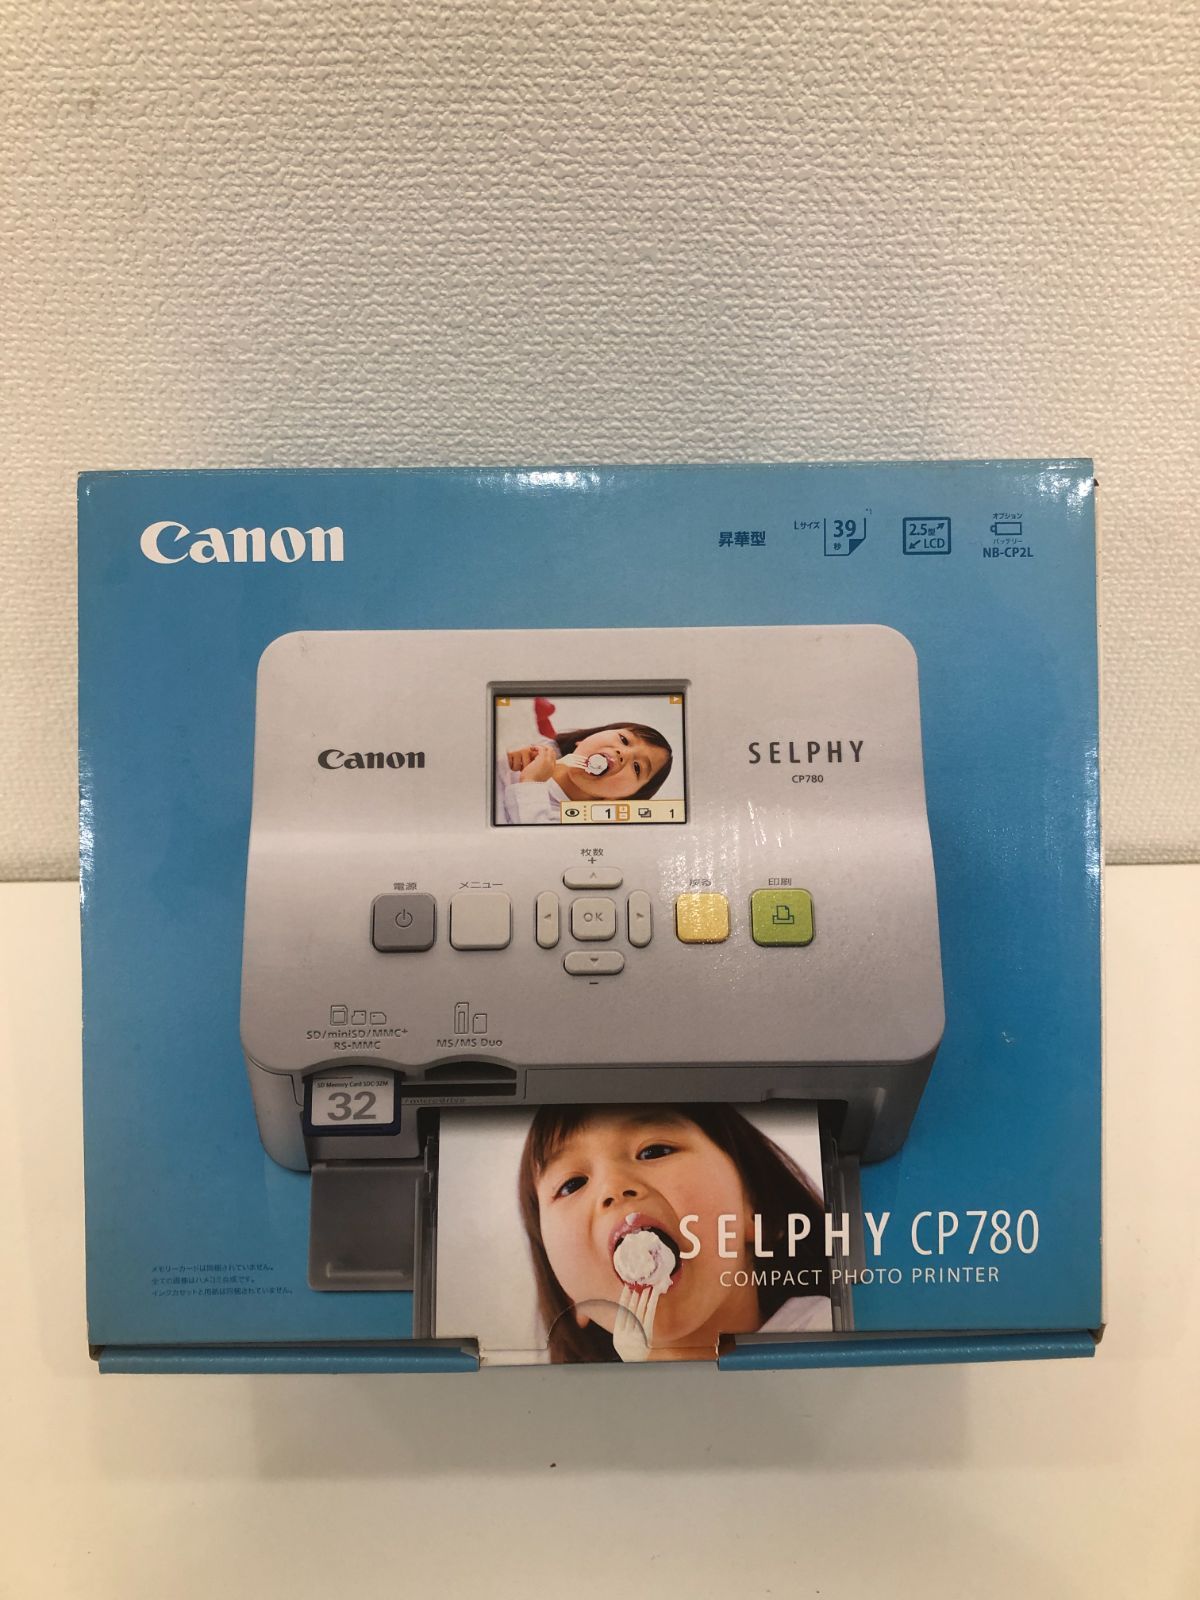 A【未使用】Canon SELPHY CP780 コンパクトフォトプリンター - shop ...